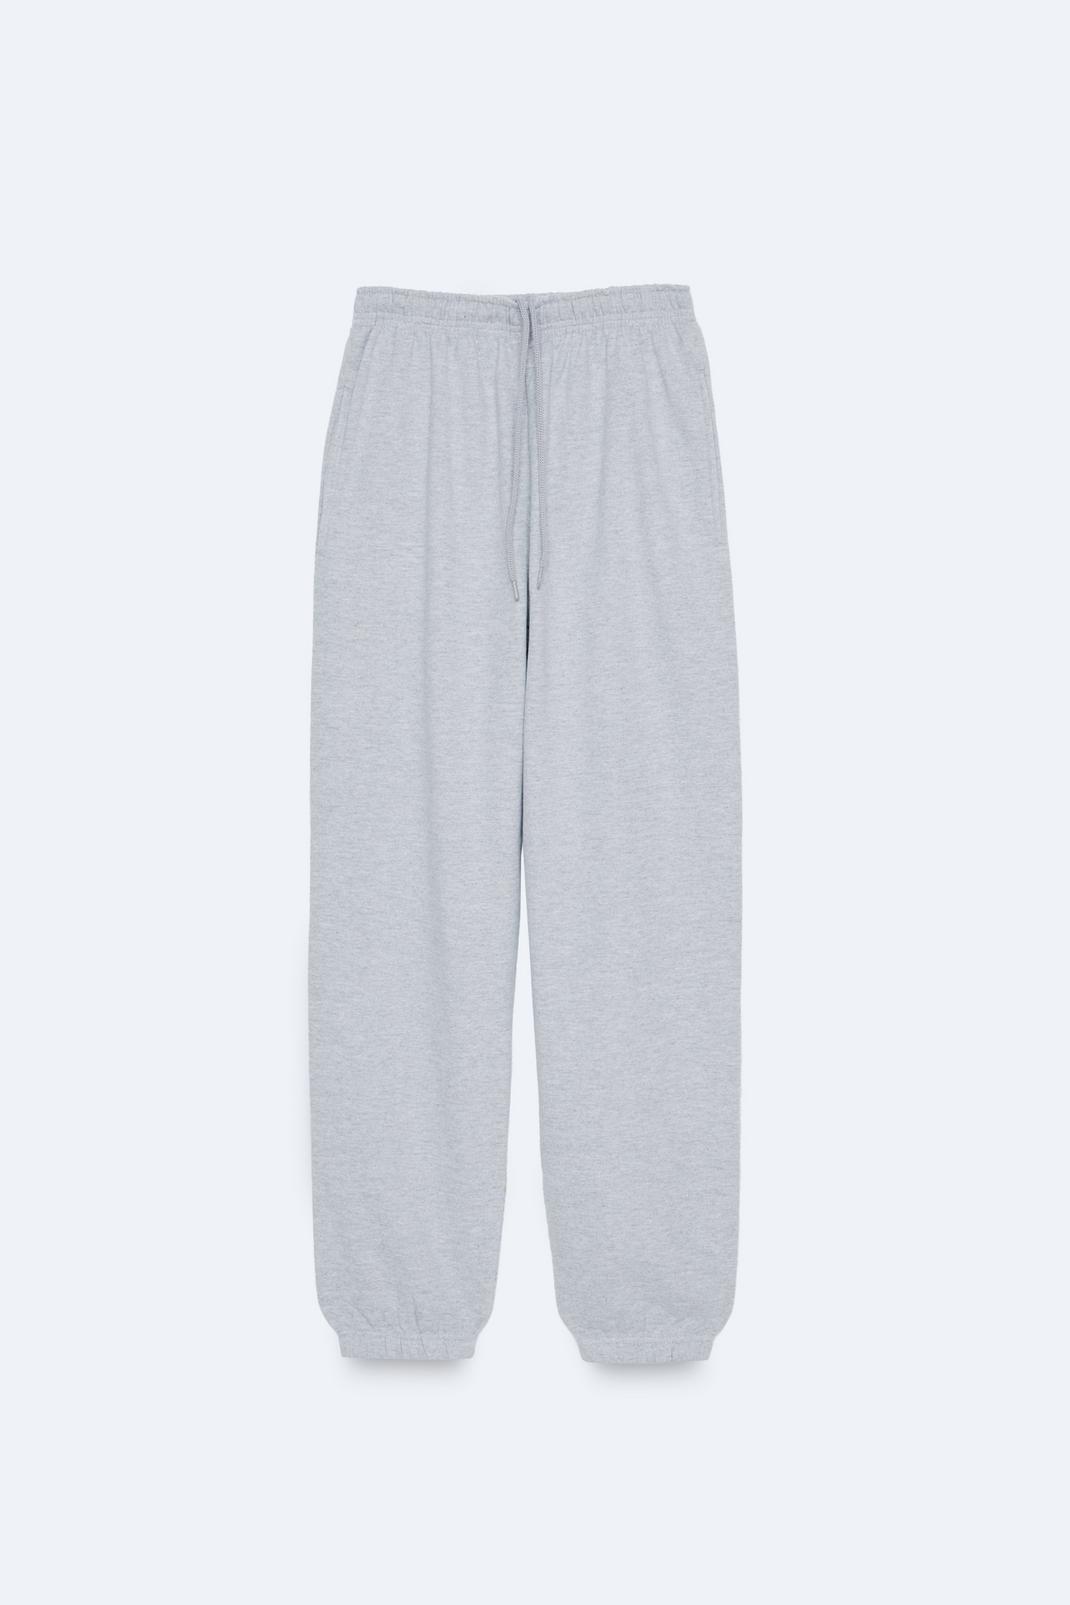 Grey High Waisted Loose Fit Cuffed Sweatpants image number 1